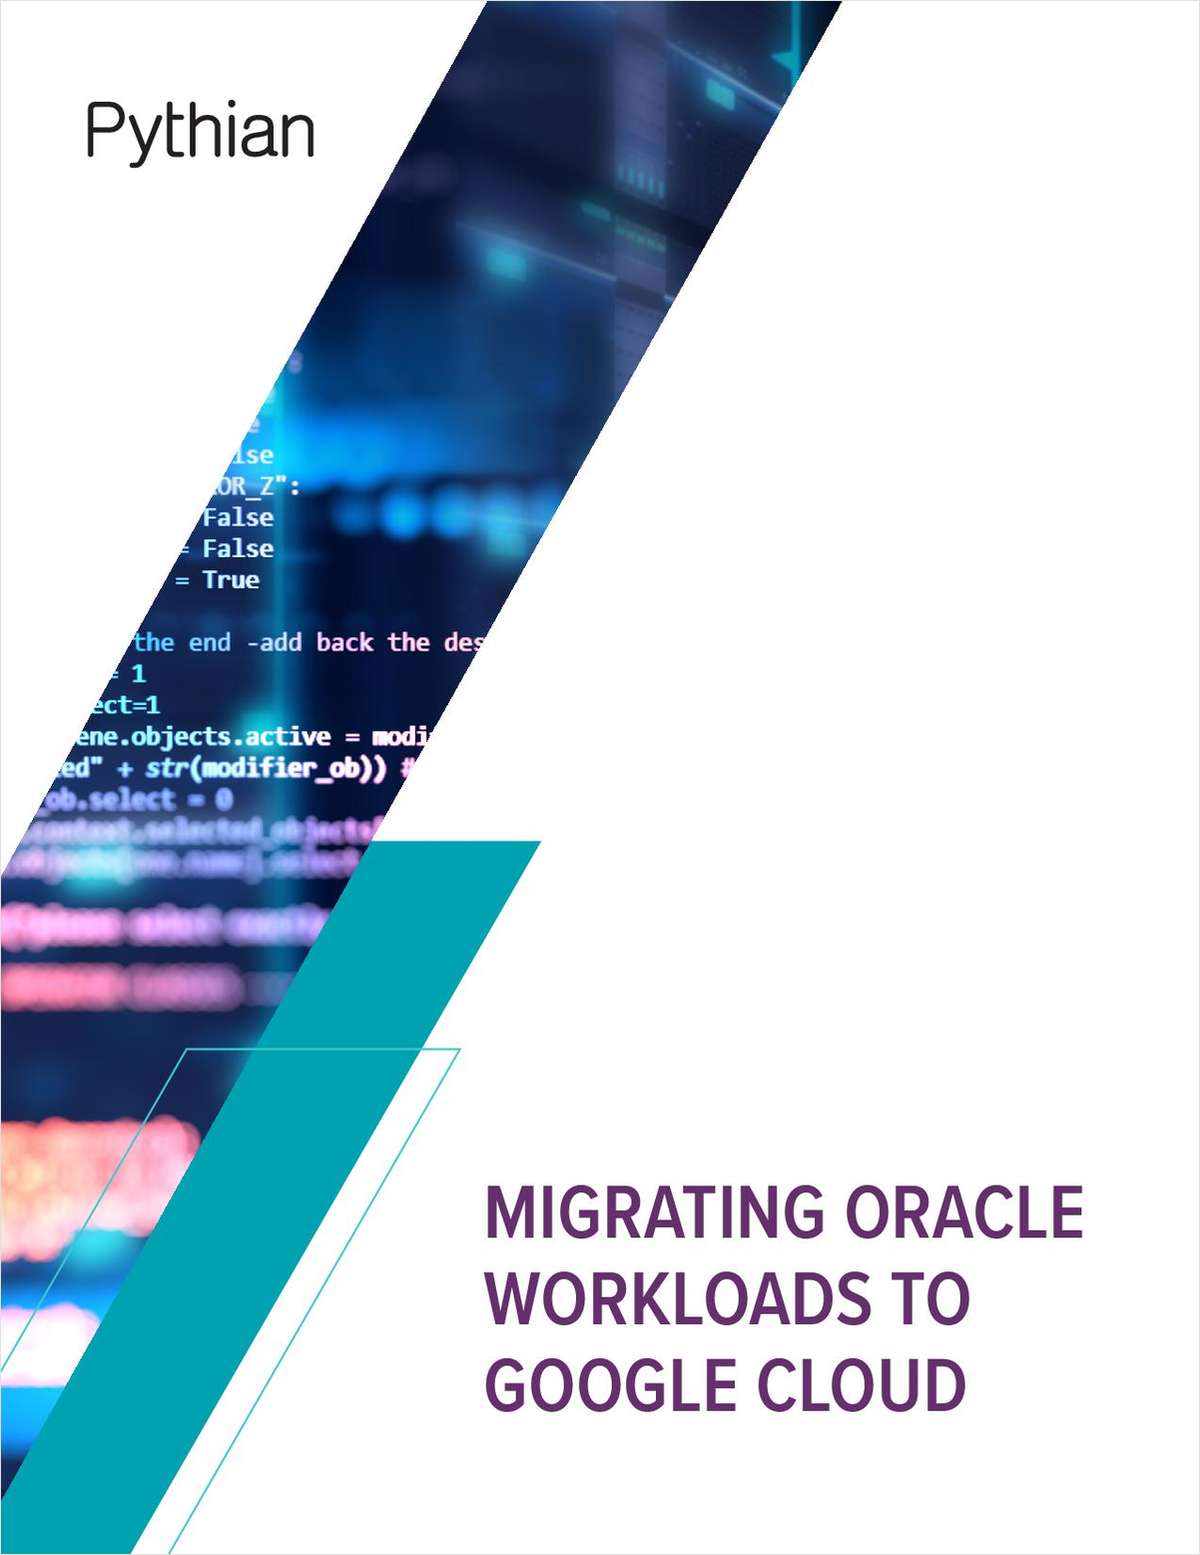 Migrating Oracle Workloads to Google Cloud